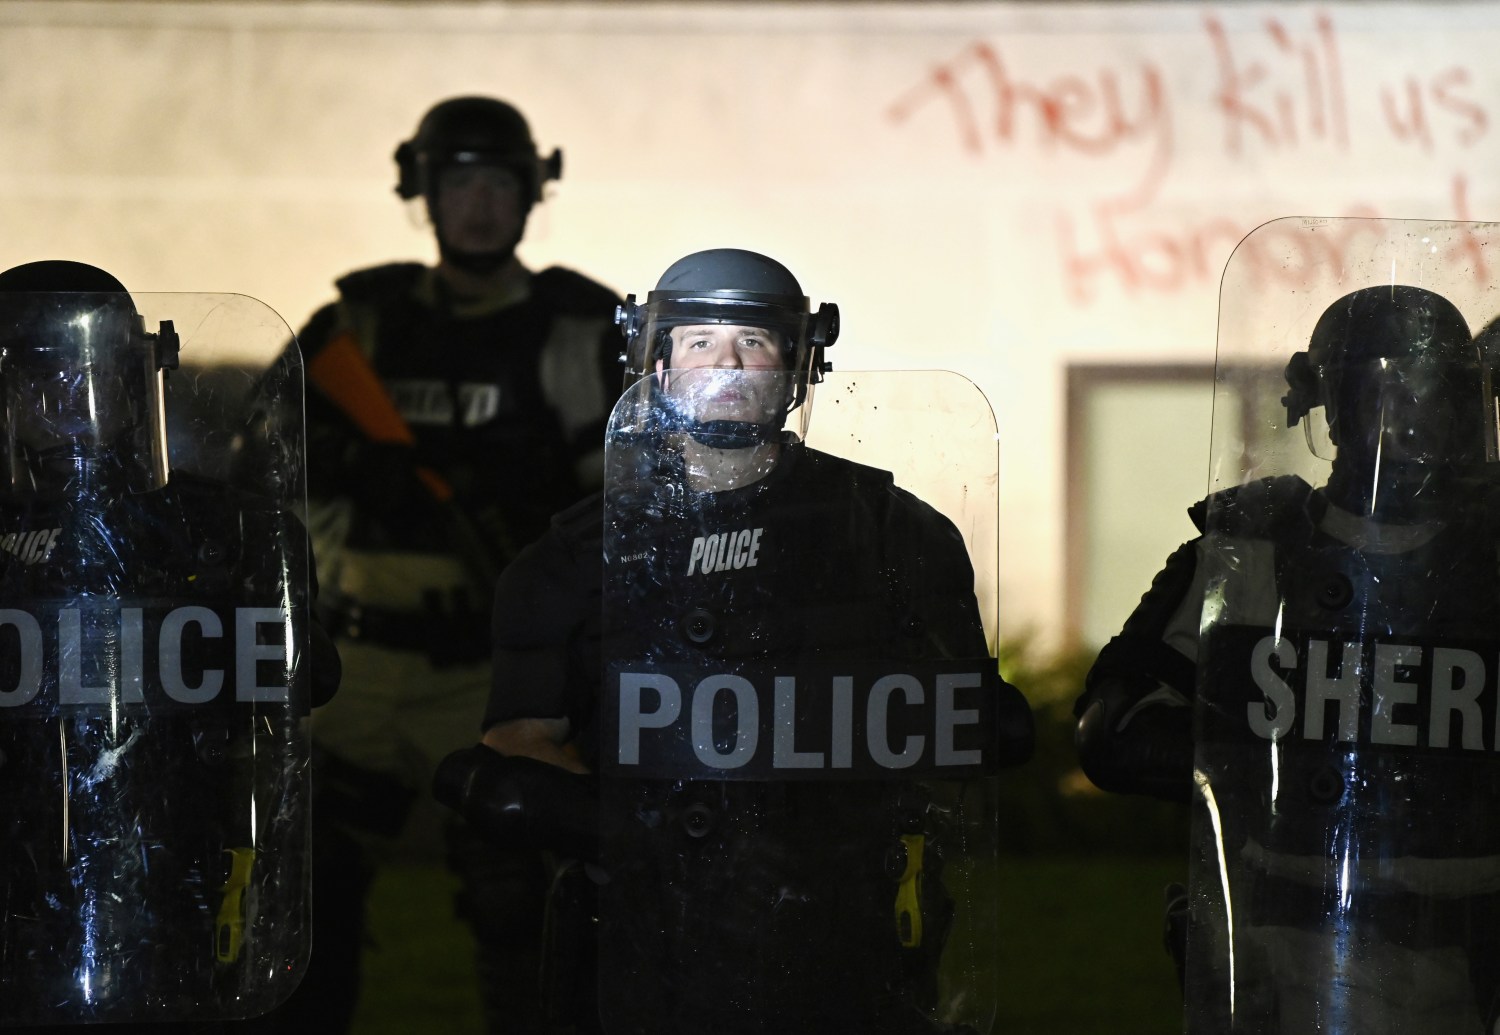 How can we enhance police accountability in the United States? | Brookings